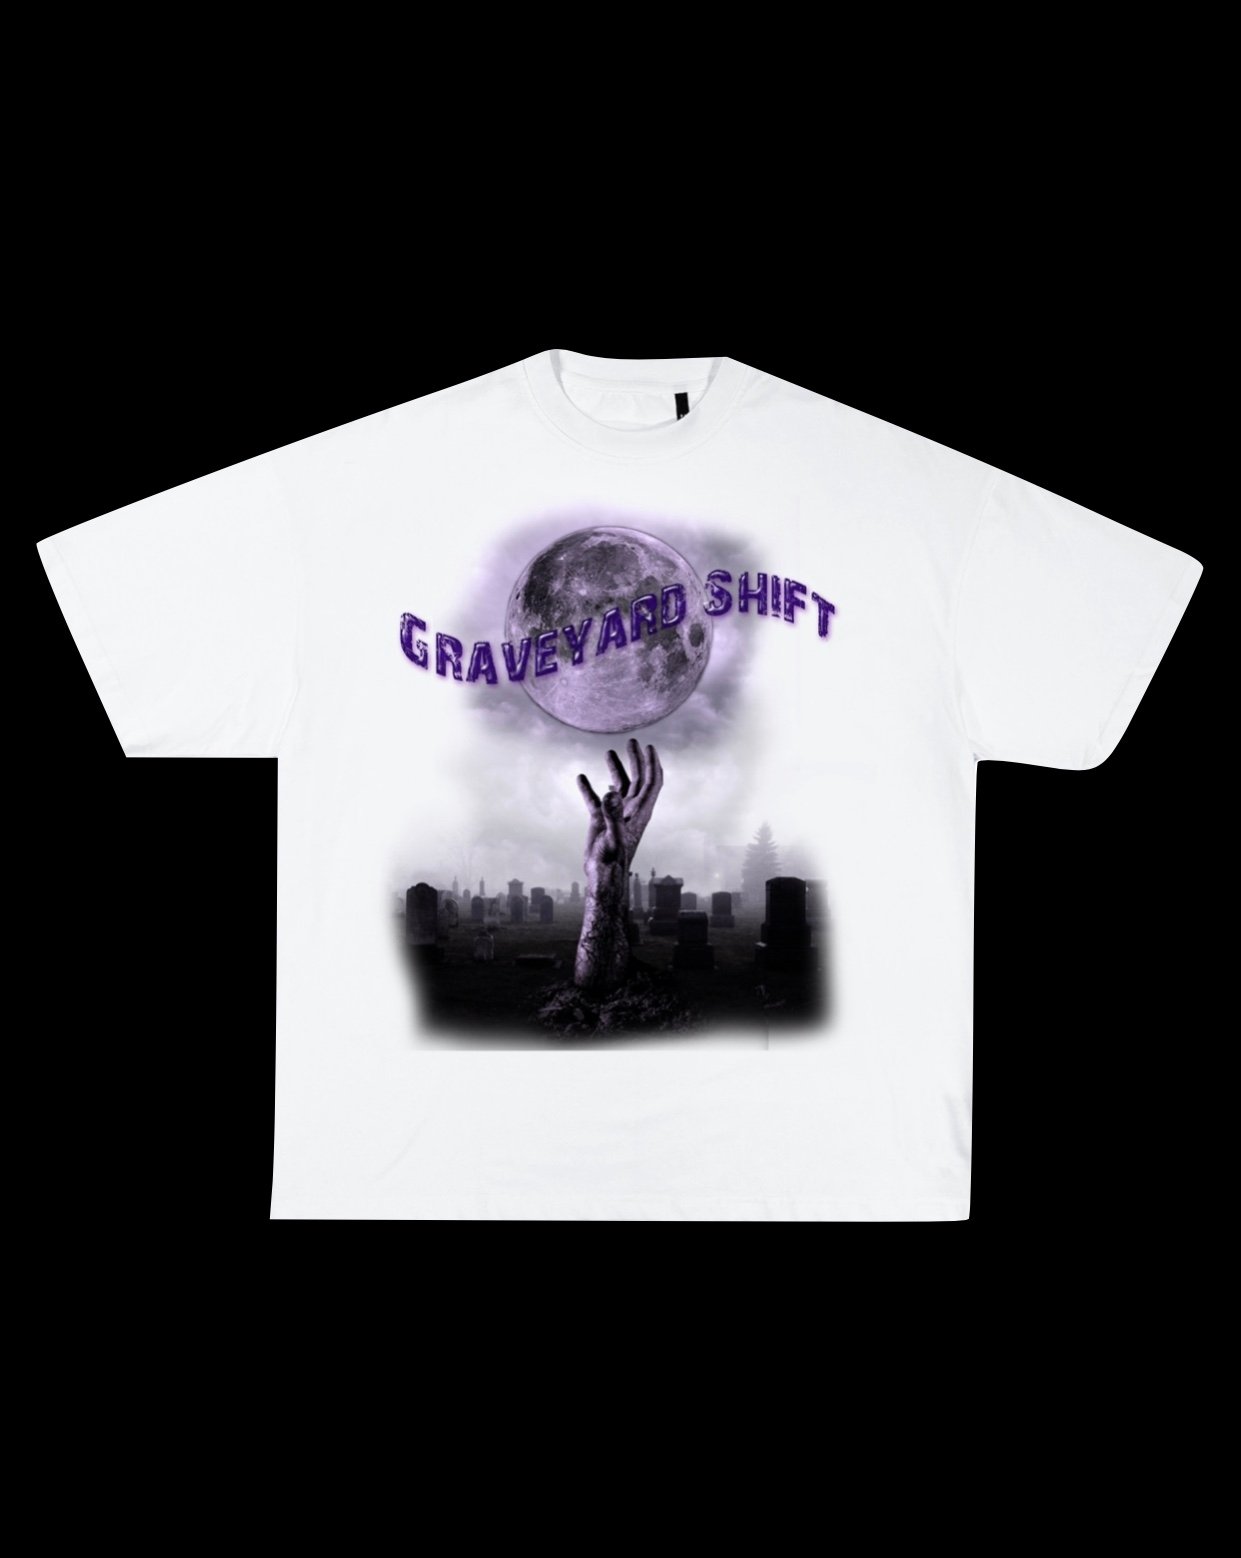 Working The Graveyard Shift  Essential T-Shirt for Sale by